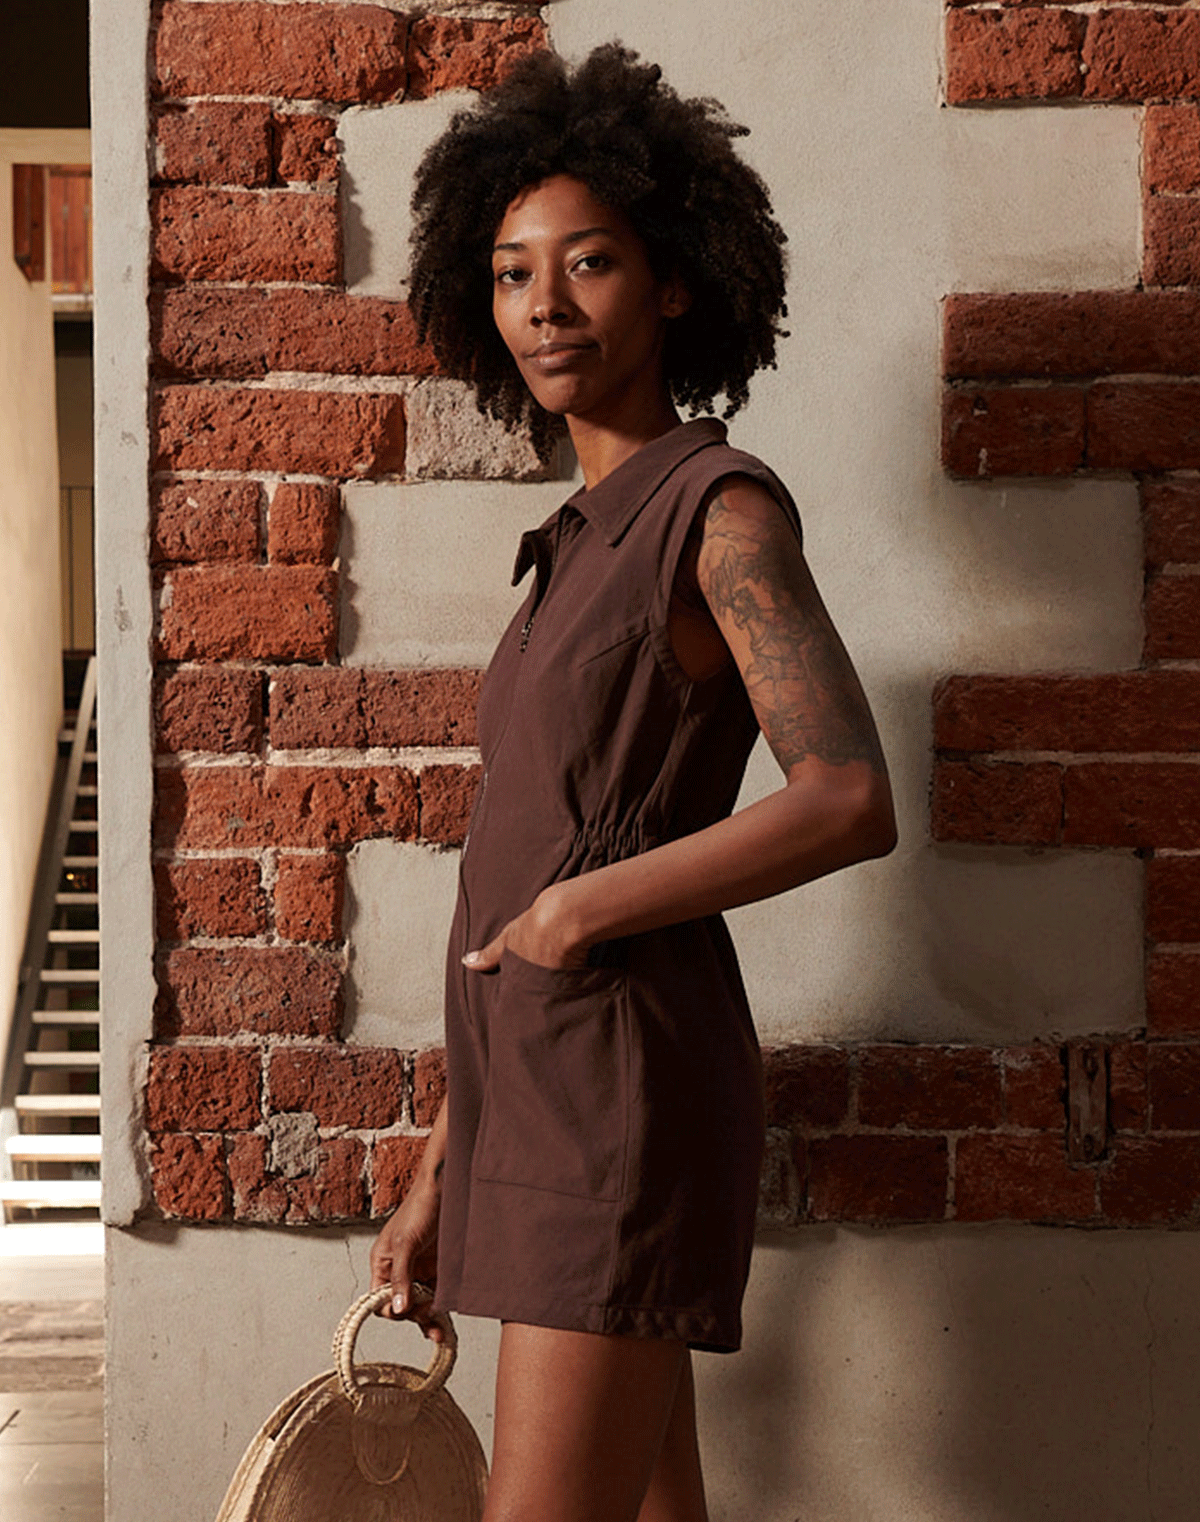 Noble Sleeveless Utility Romper Tank Suit in chocolate